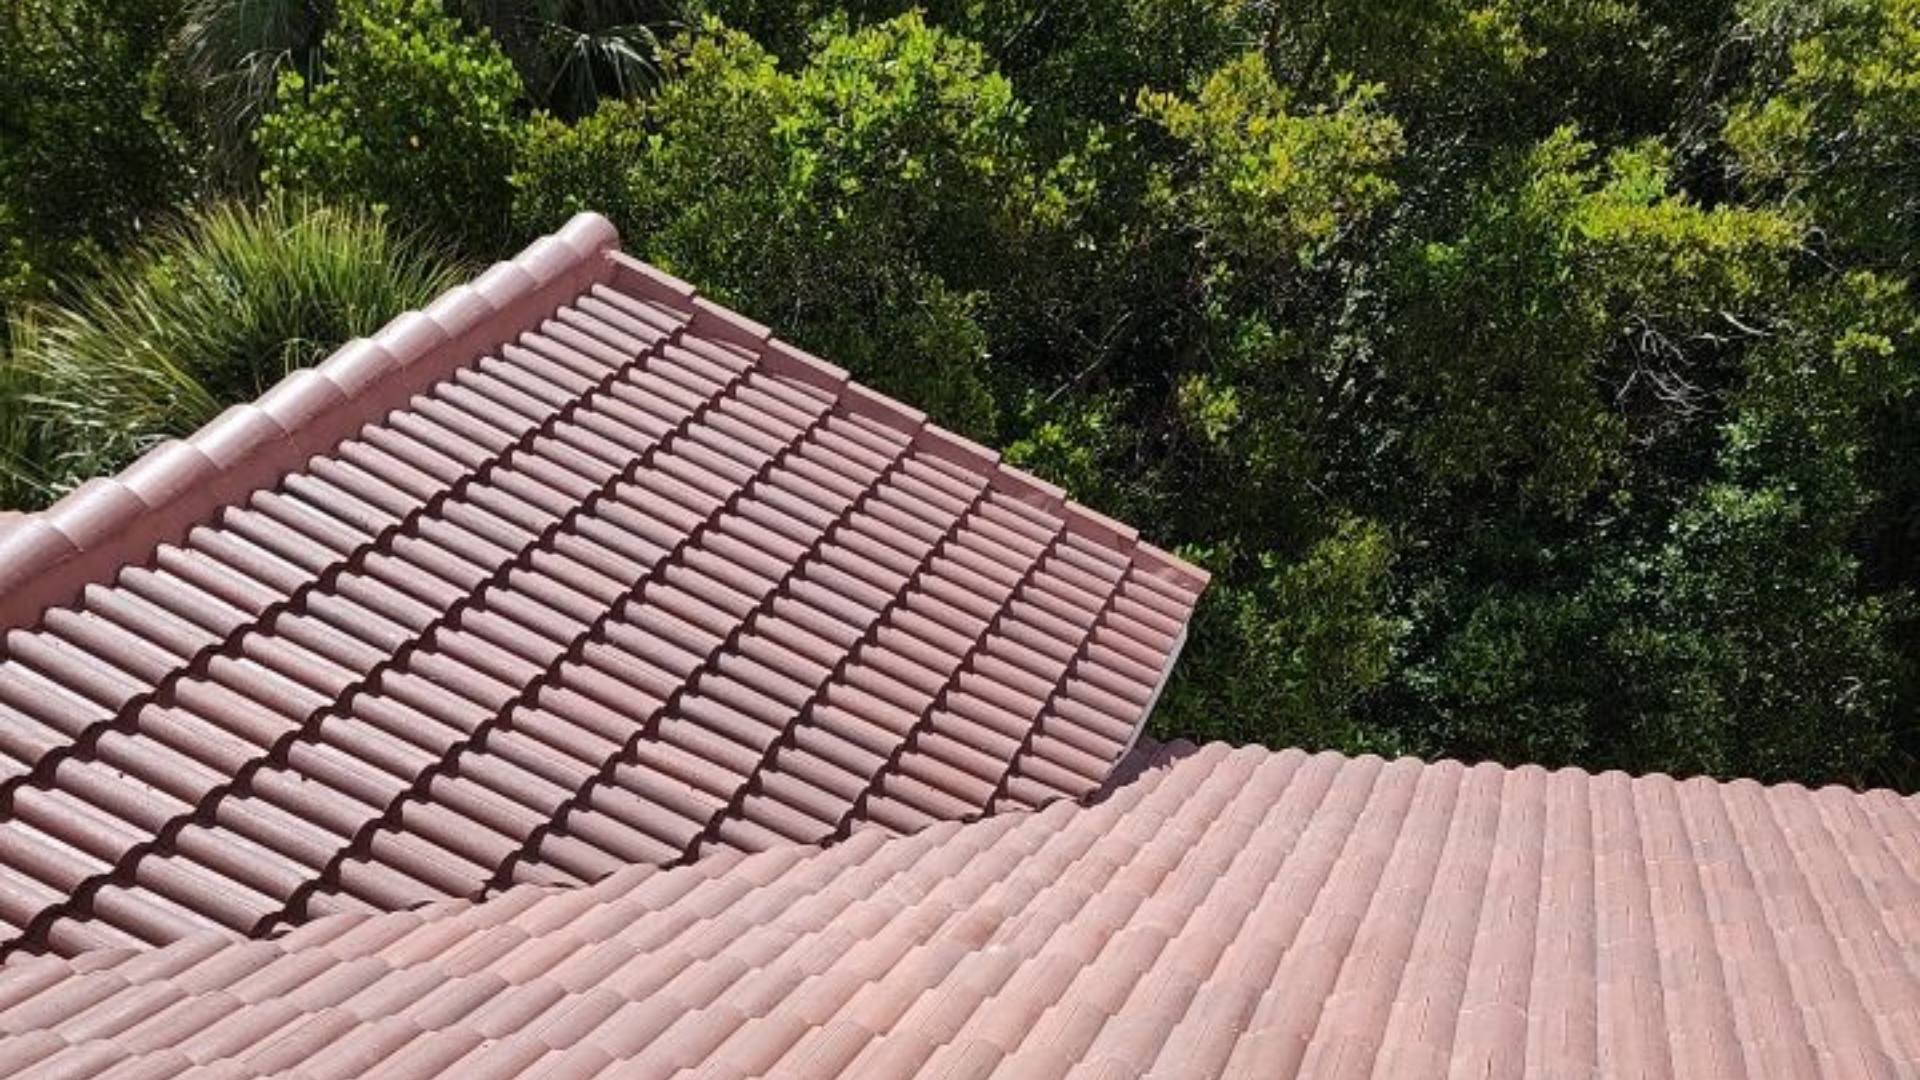 Mariners Cay Condo re-roofing tiles